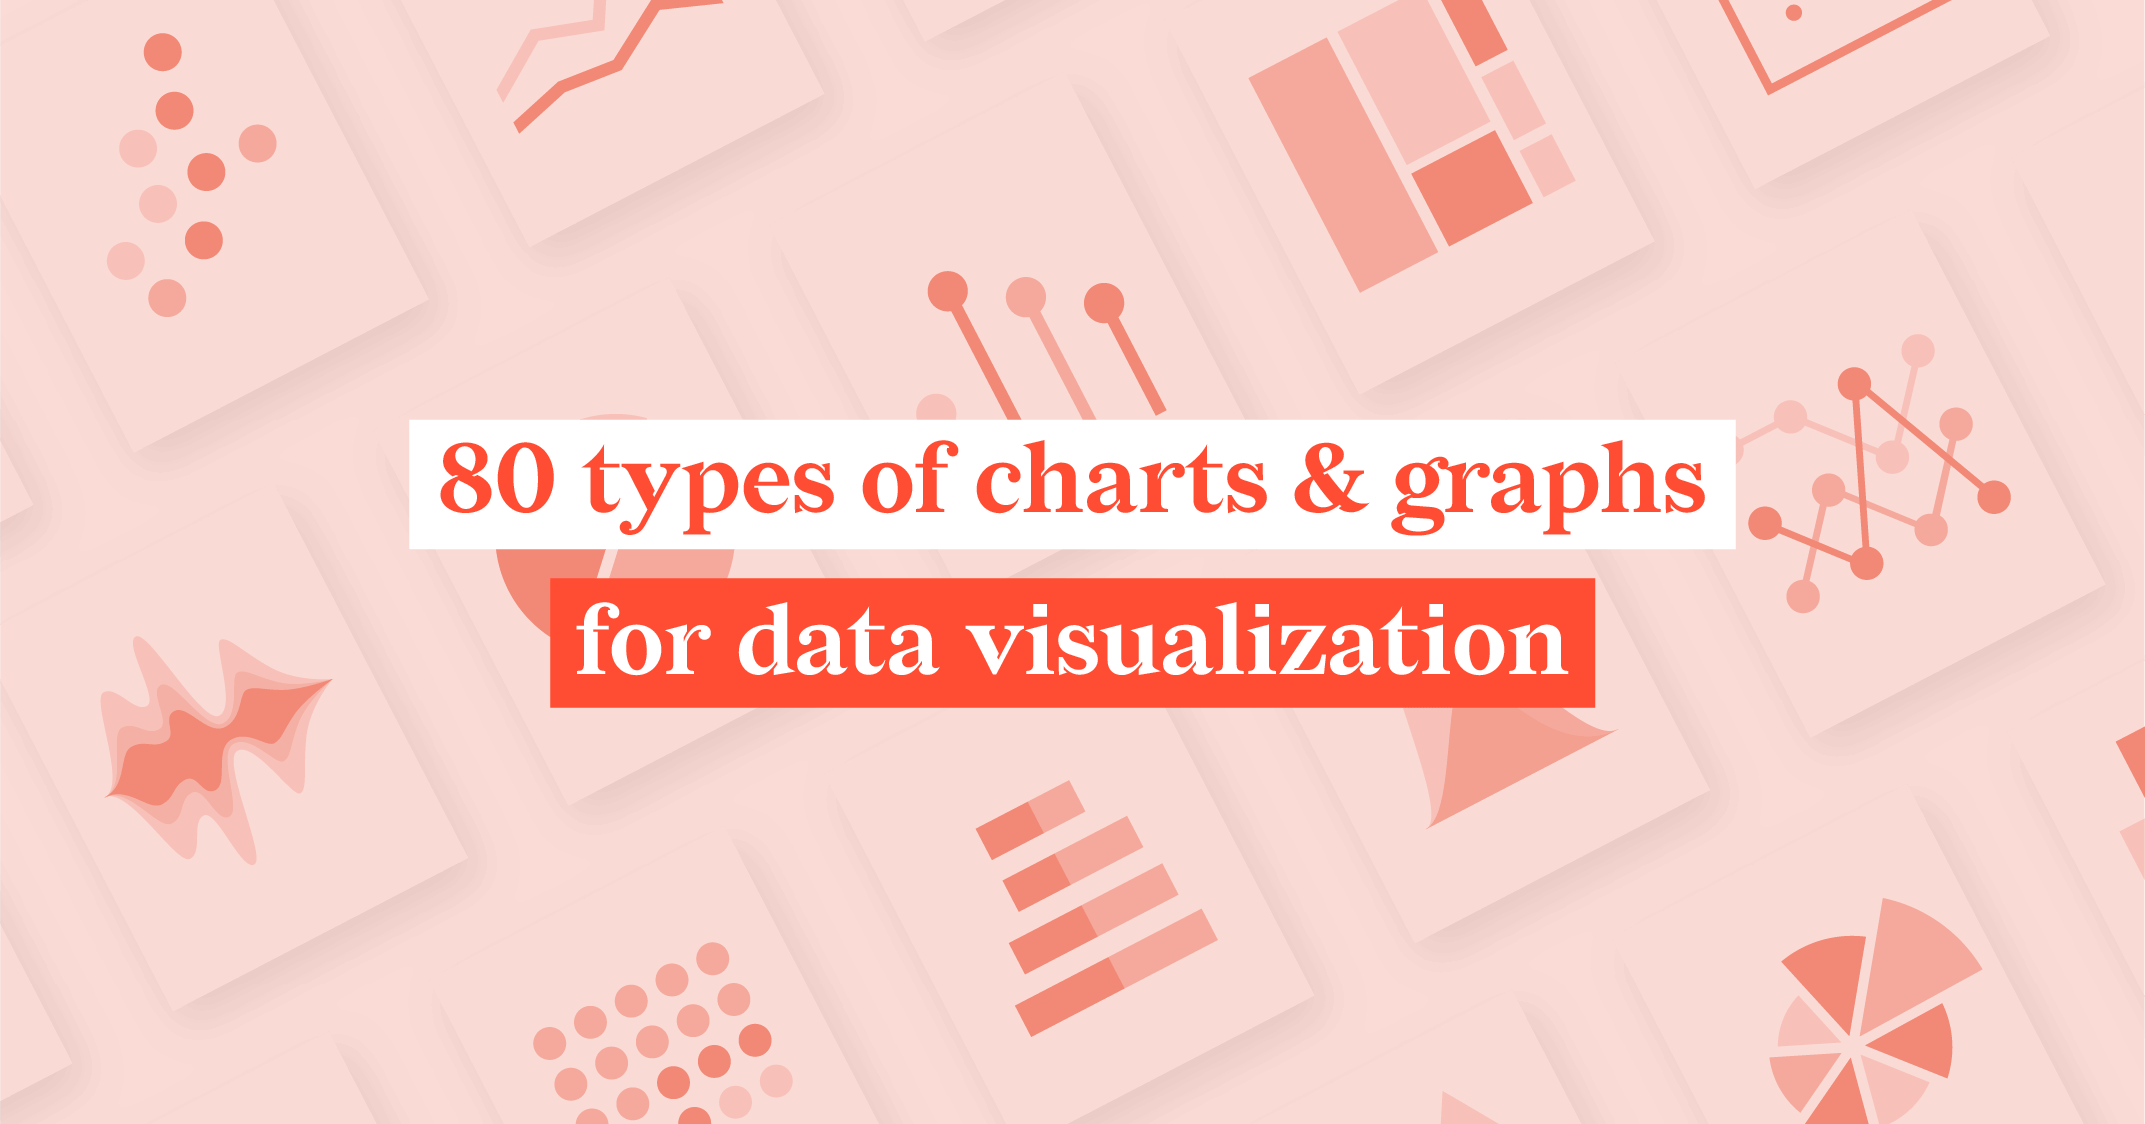 80 types of stunning charts and graphs for data visualization in different industries with many chart examples and definitions